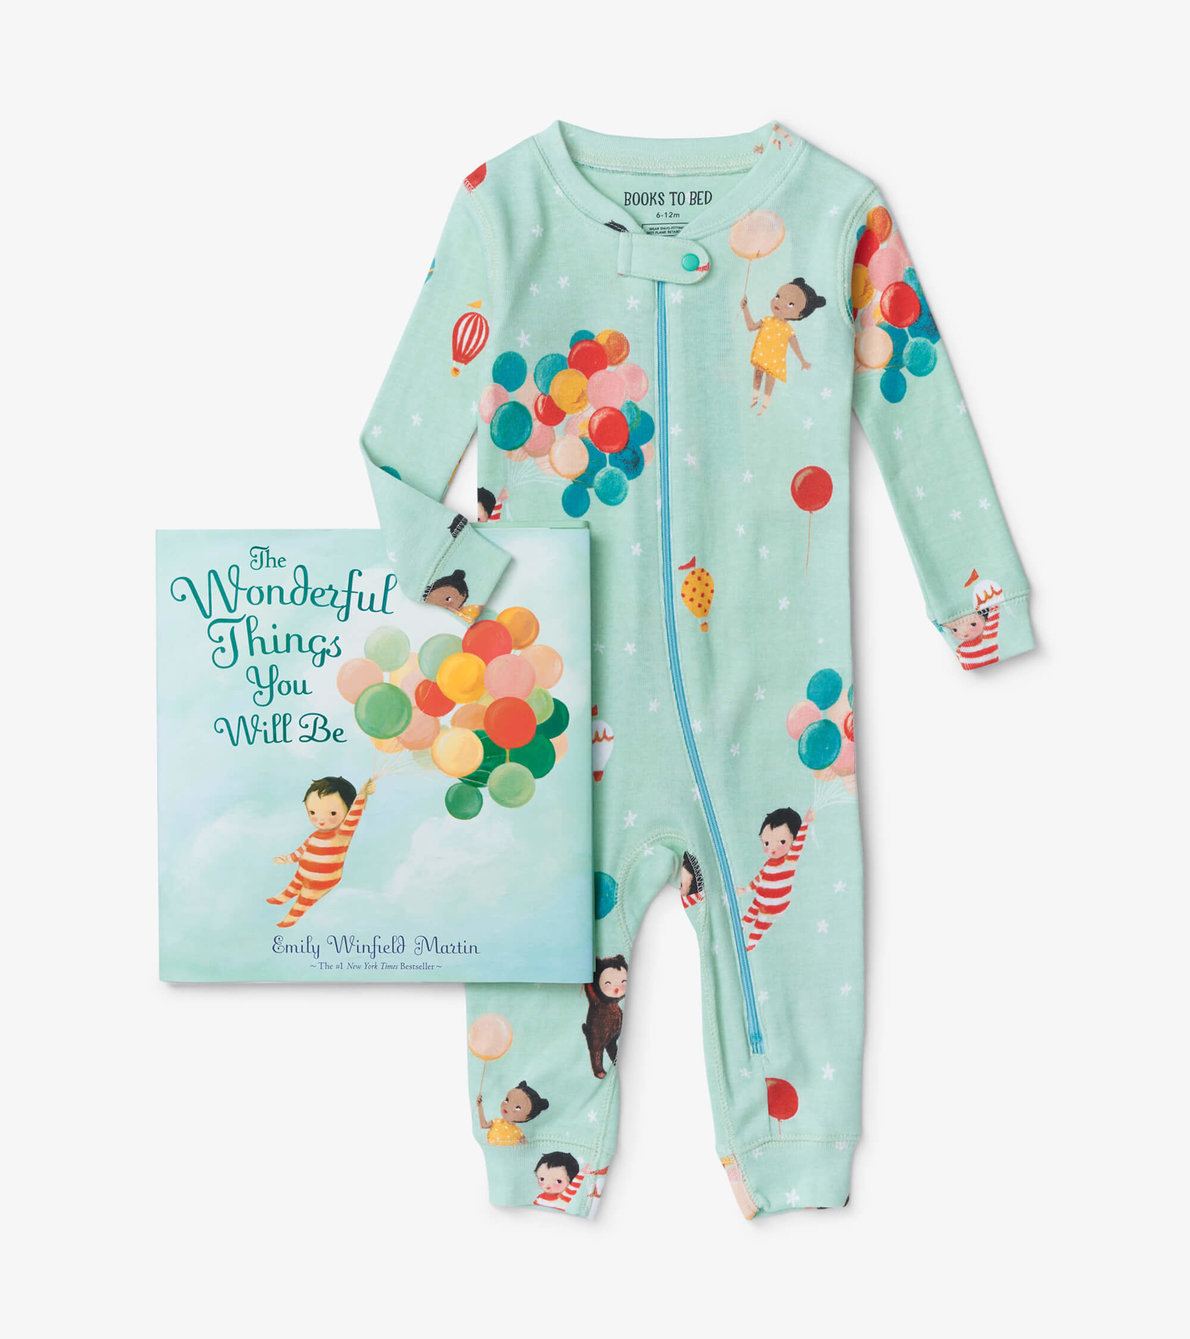 View larger image of The Wonderful Things You Will Be Book and Infant Coverall